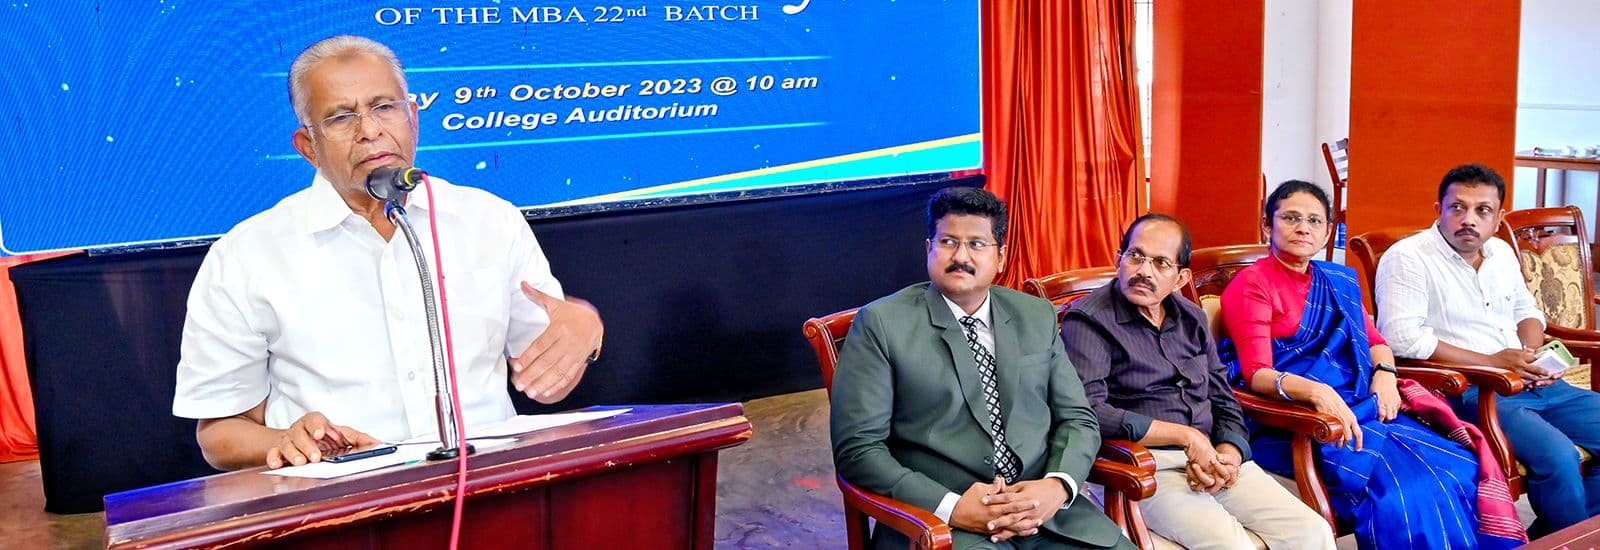 "INAUGURATION OF THE MBA 22nd BATCH by Jb. E.T.MOHAMMED BASHEER, MP-PONNANI